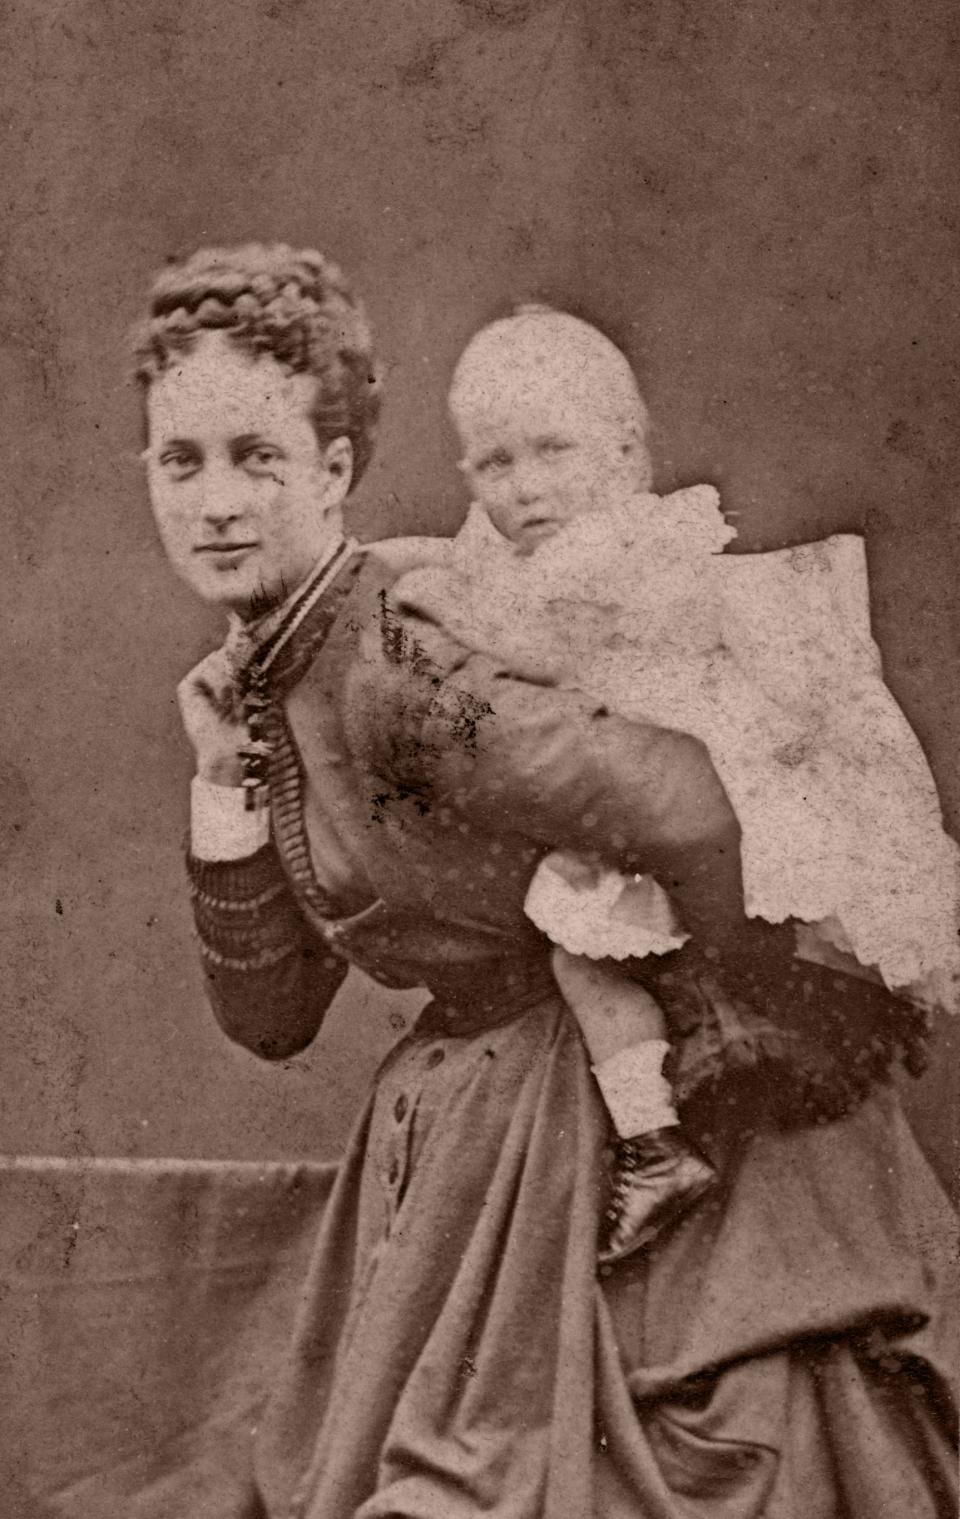 Princess Alexandra and one of her children in the late 19th century.